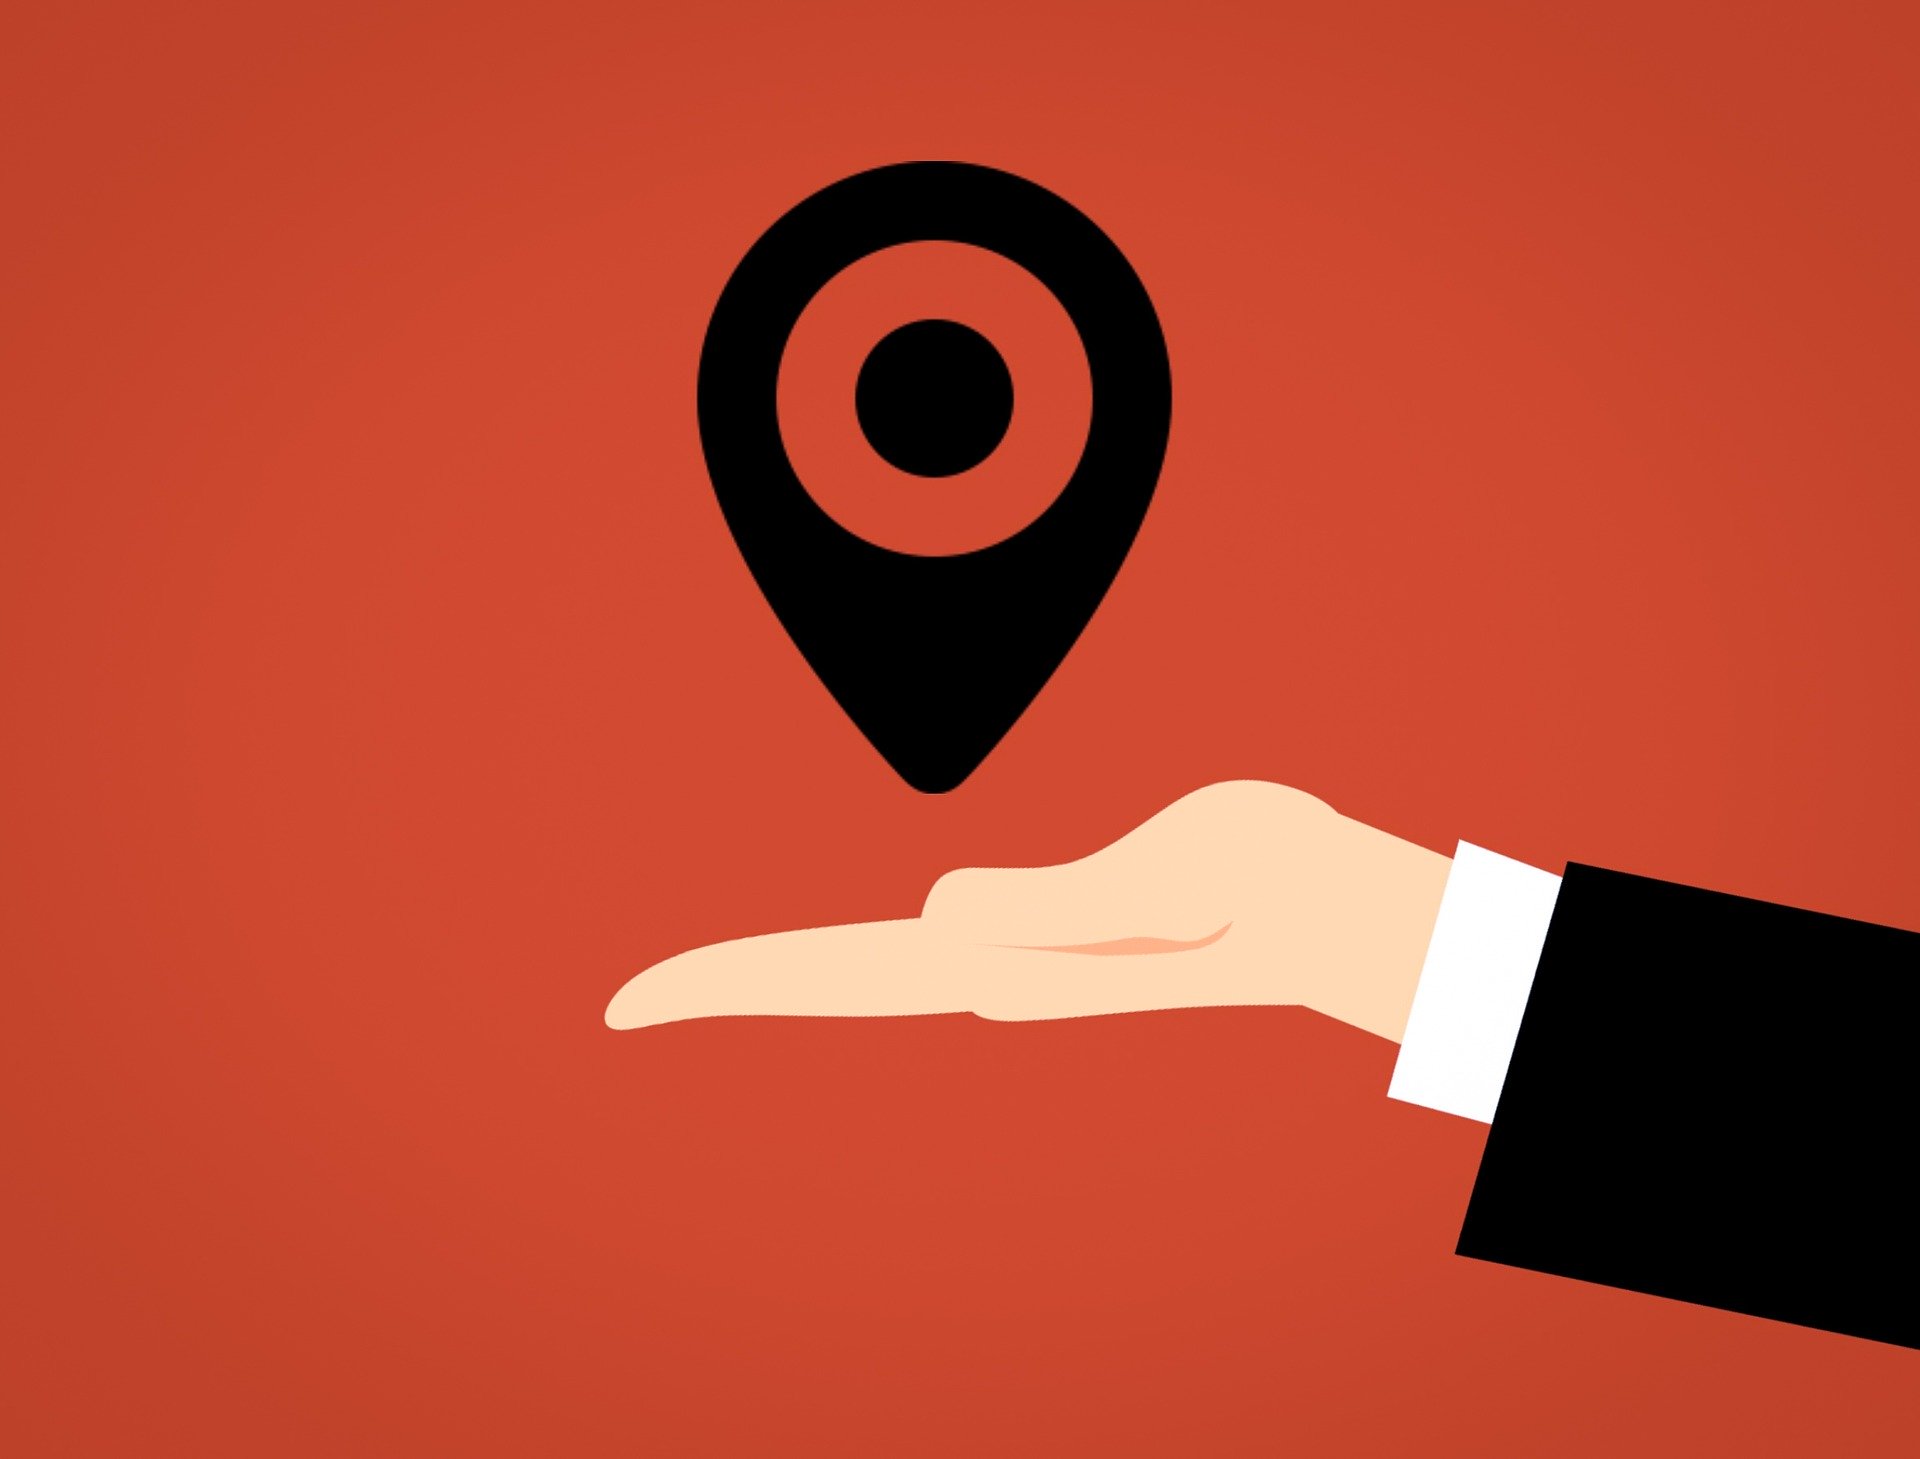 Location Tracking SDK Guide: What You Need to Know